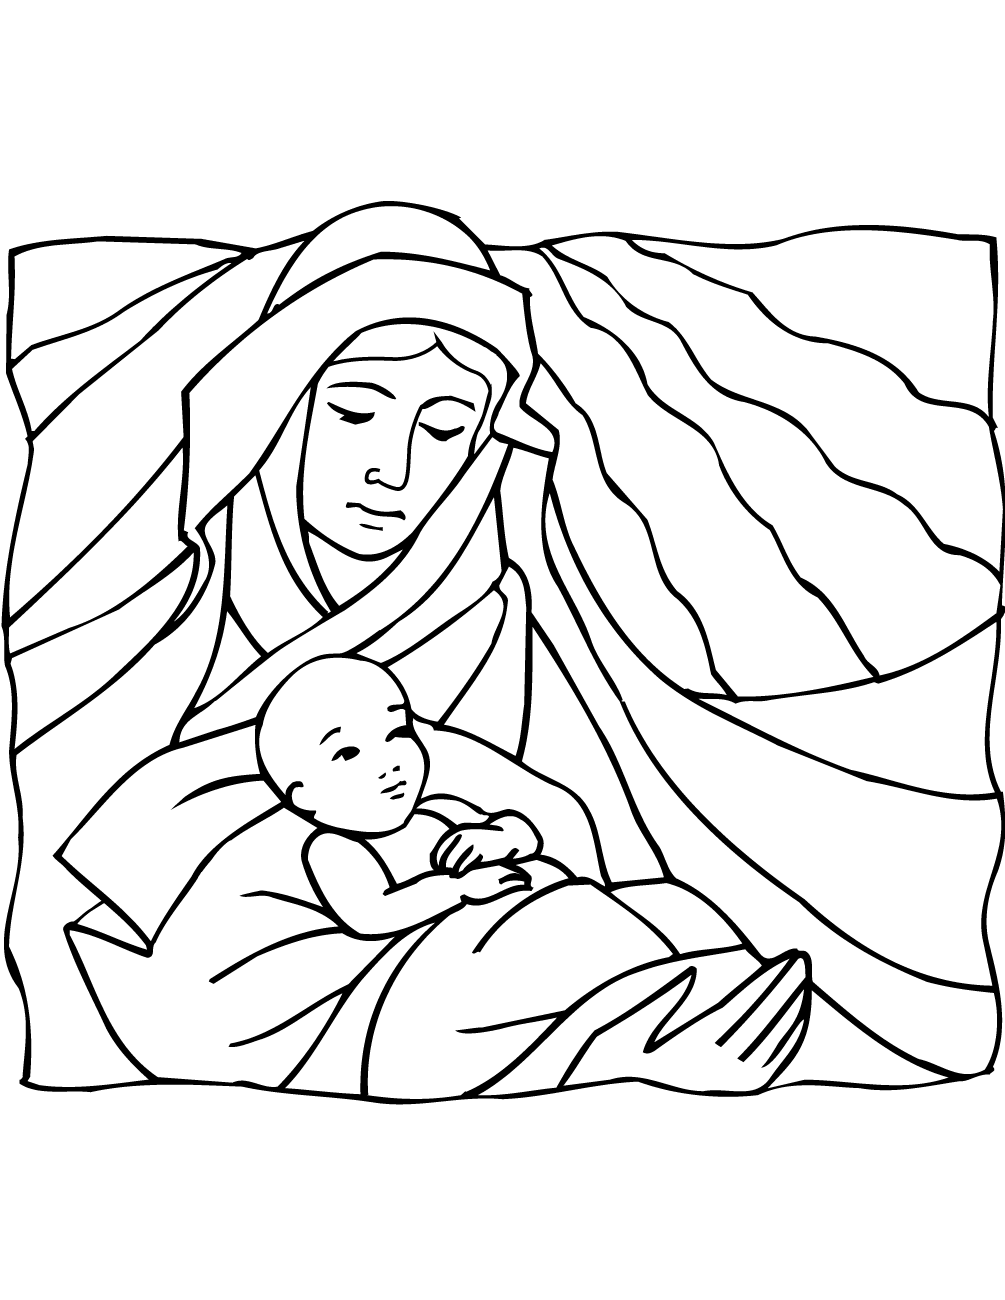 Mary Holding Baby Coloring Page Coloring Page